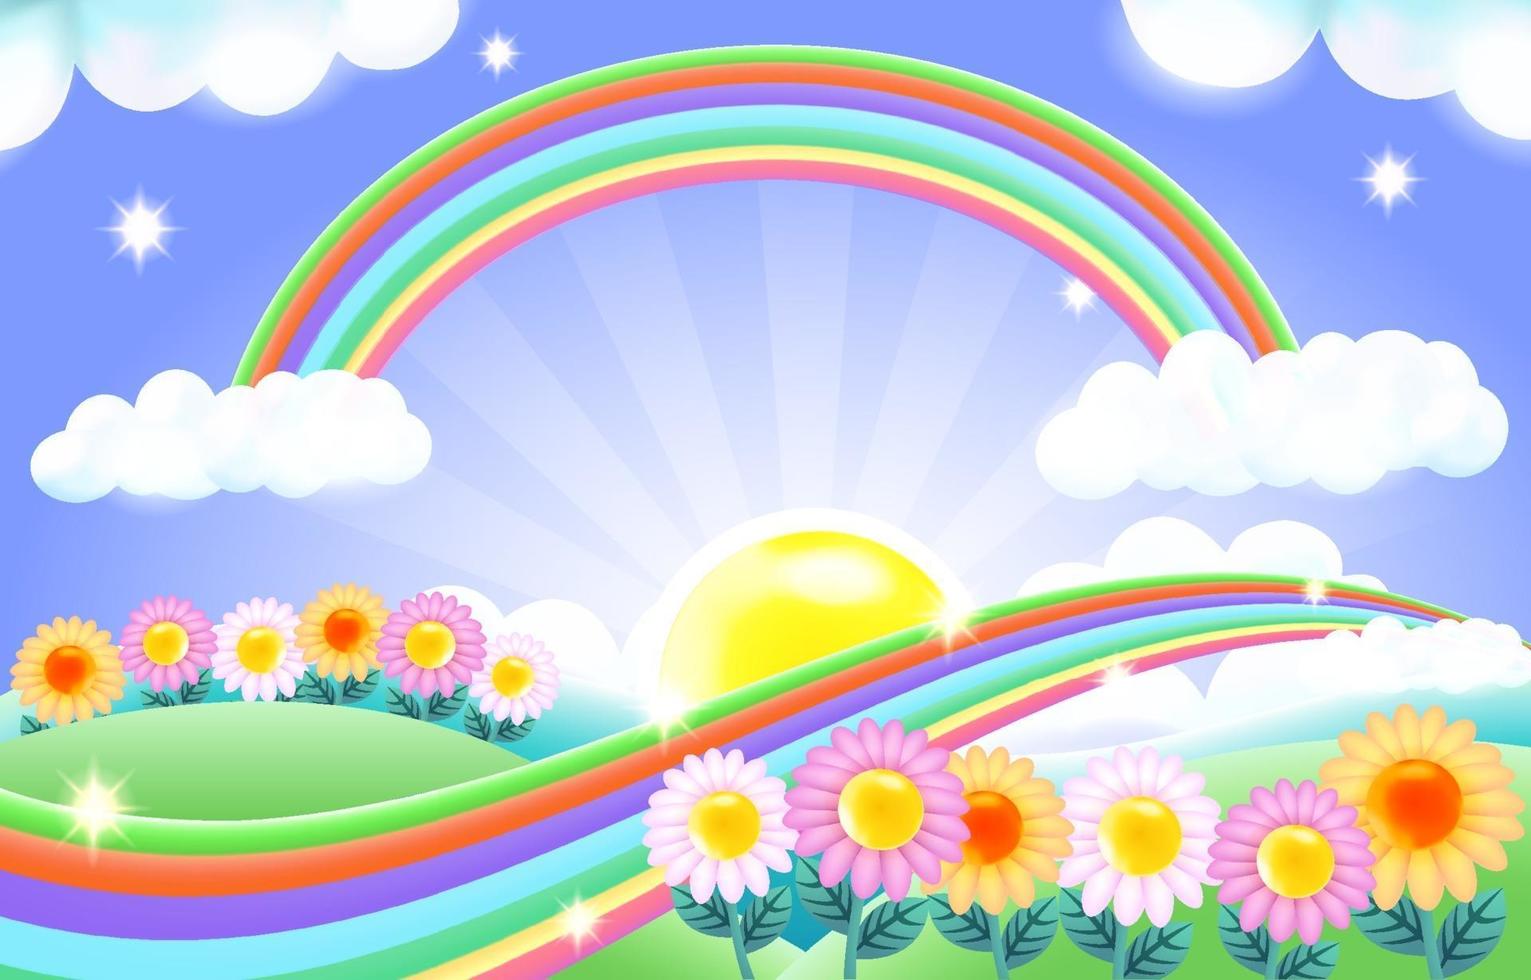 Colourful bright rainbow background with flowers field illustration vector